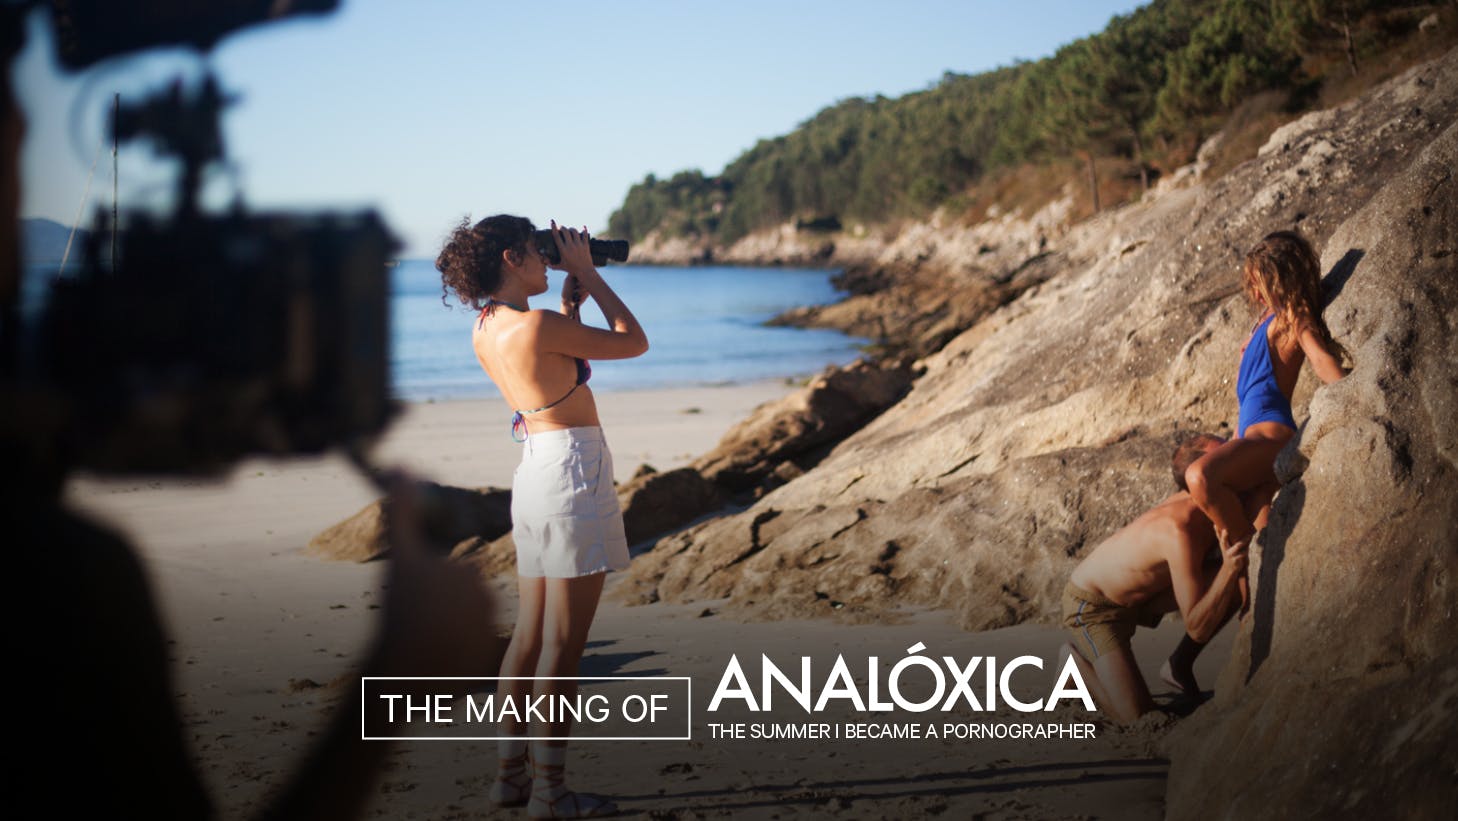 Behind The Scenes ANALÓXICA - The Summer I Became a Pornographer